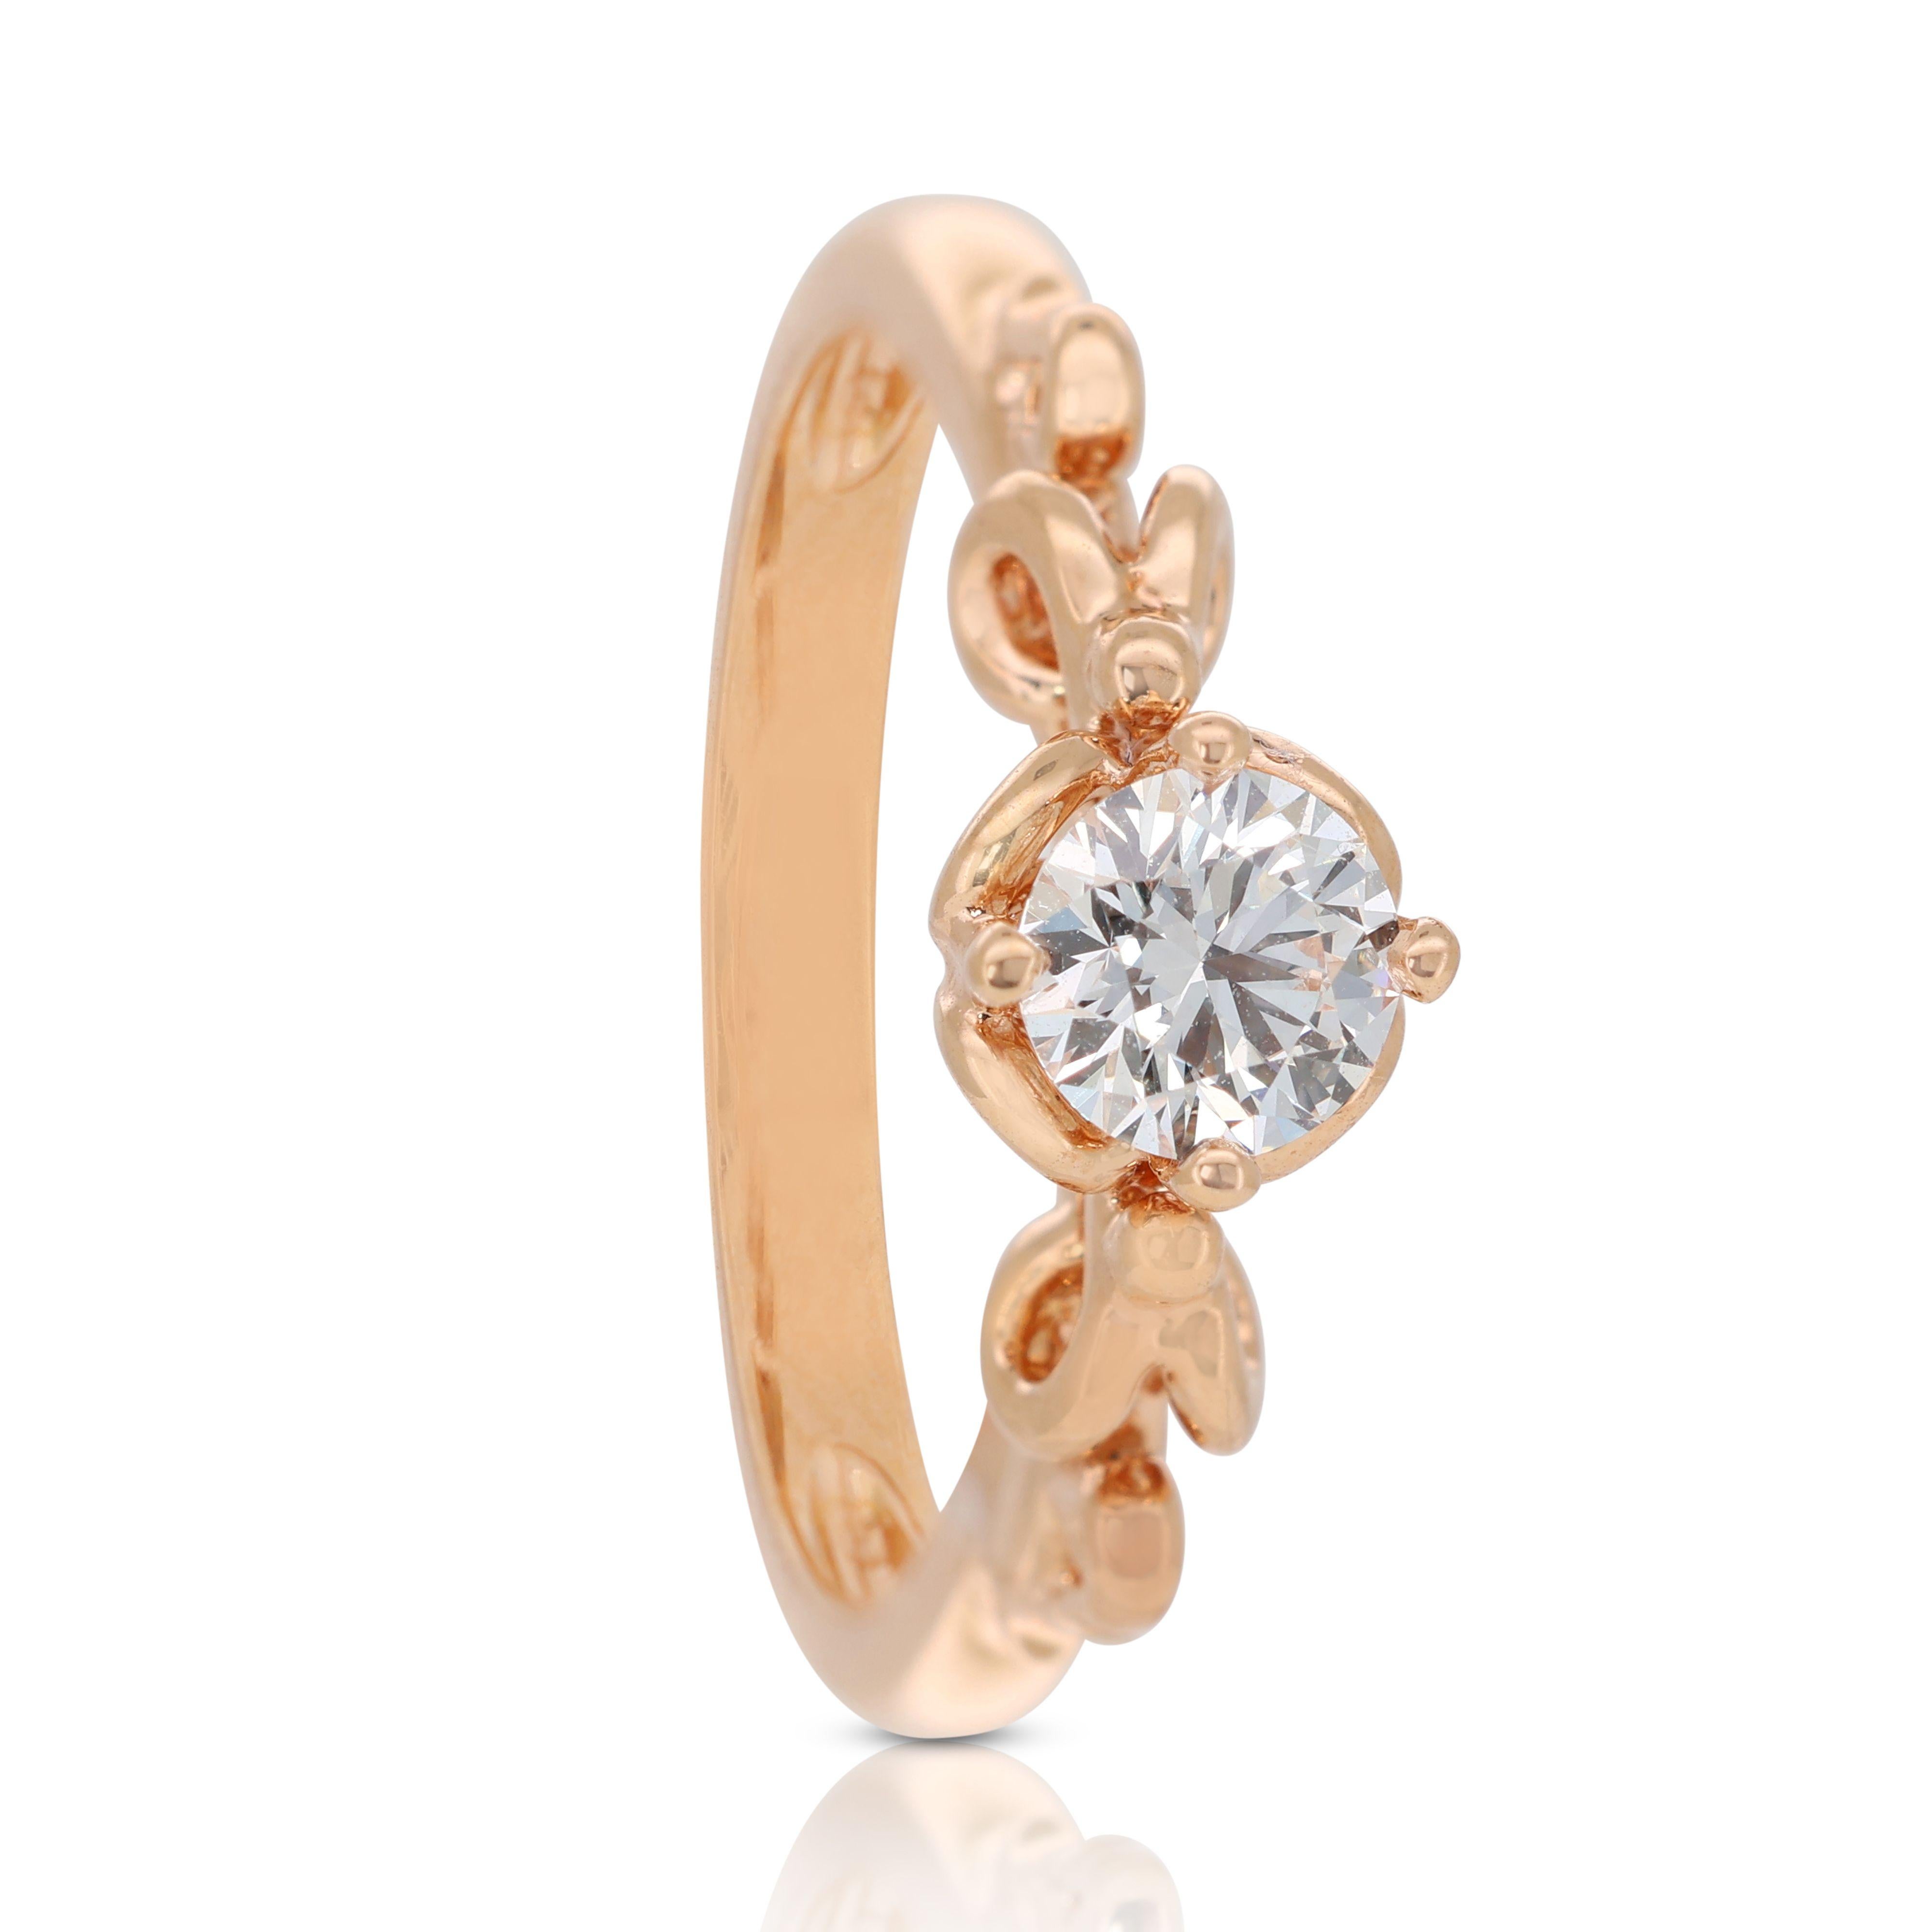 Exquisite 0.30ct Solitaire Diamond Ring set in 18K Rose Gold For Sale 1